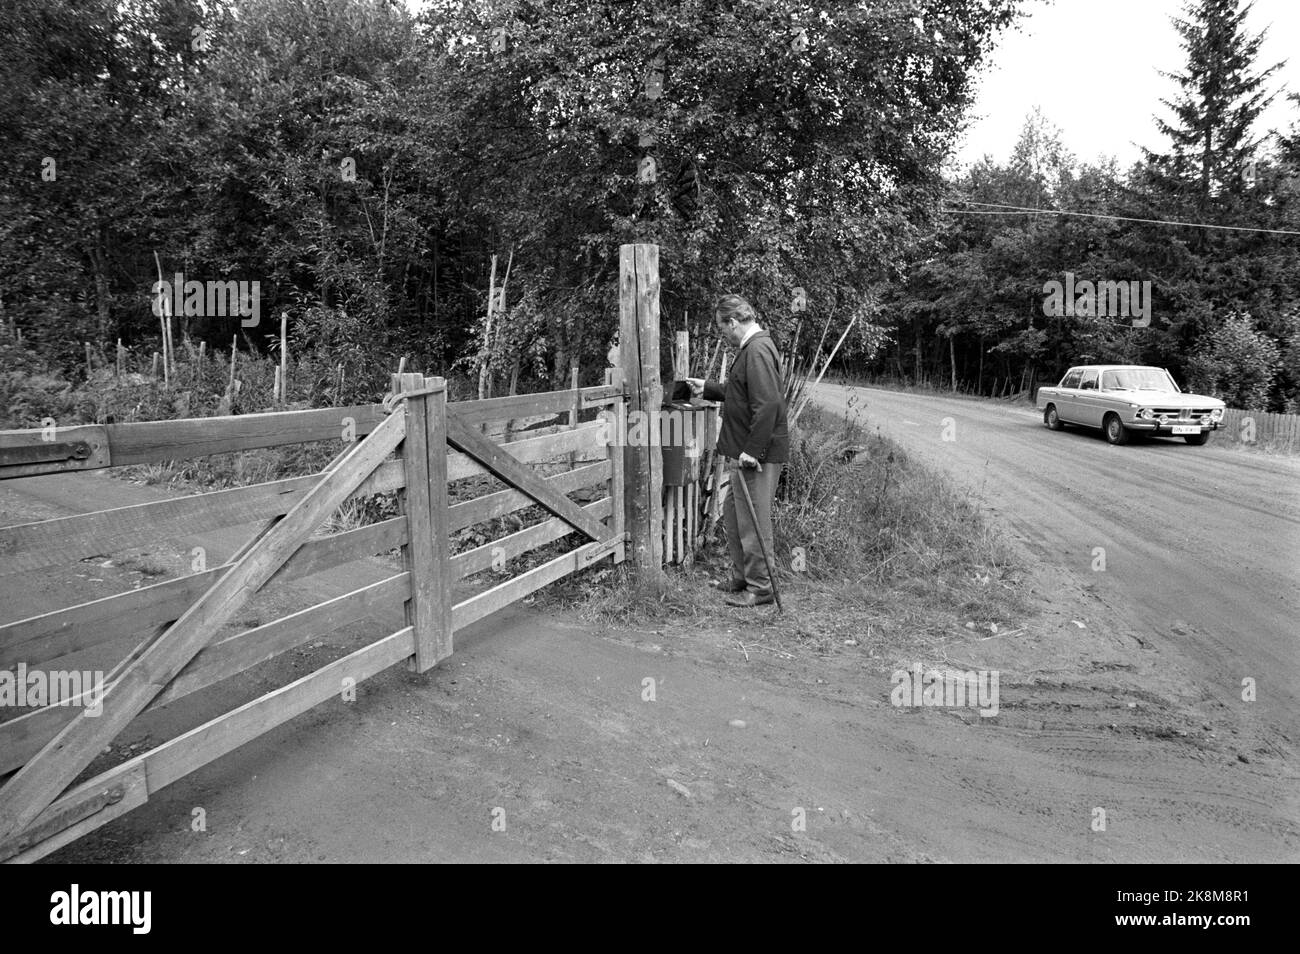 Hamar in the summer of 1970. West Germany's Chancellor Willy Brandt and Mrs. Rut Brandt bought a cabin in Vangsåsen in 1965 at Hamar, and here they spend their summer holidays with the family. Here, the Chancellor picks up the post at Gåsbu, and pays tolls to be able to drive inland. Photo: Ivar Aaserud / Current / NTB Stock Photo